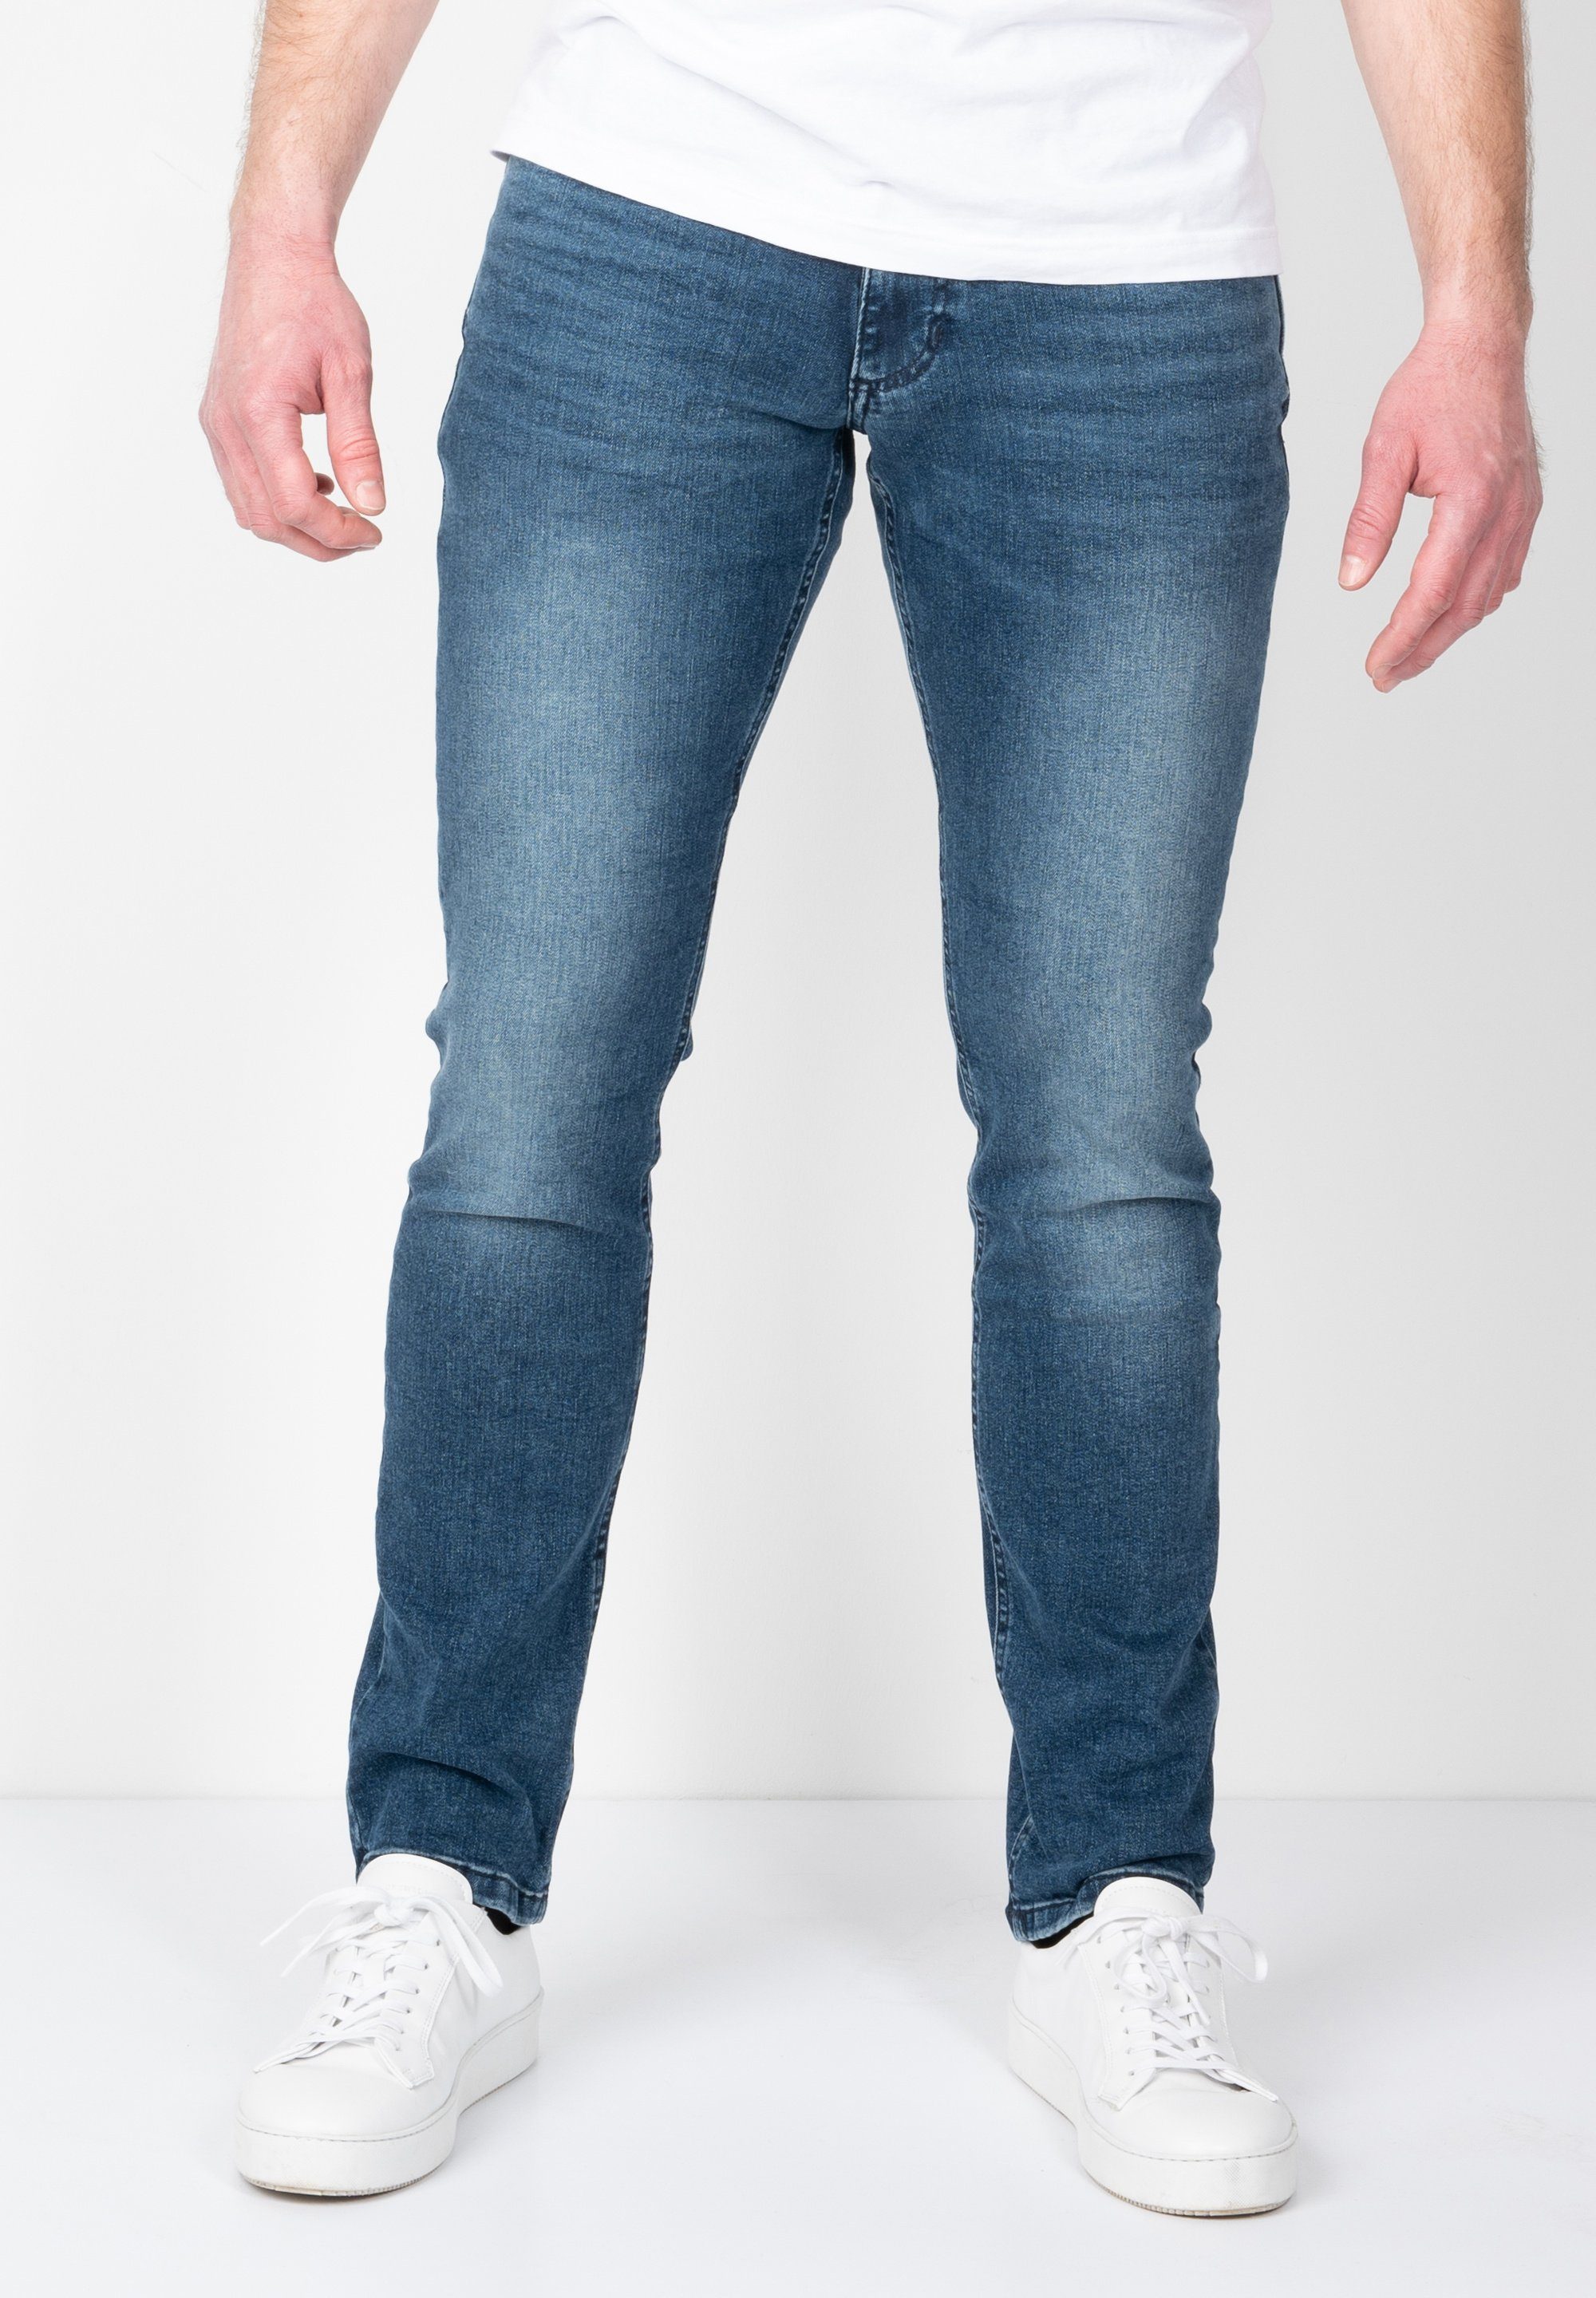 SUNWILL Straight-Jeans Super Stretch in Fitted Fit Medium Blue